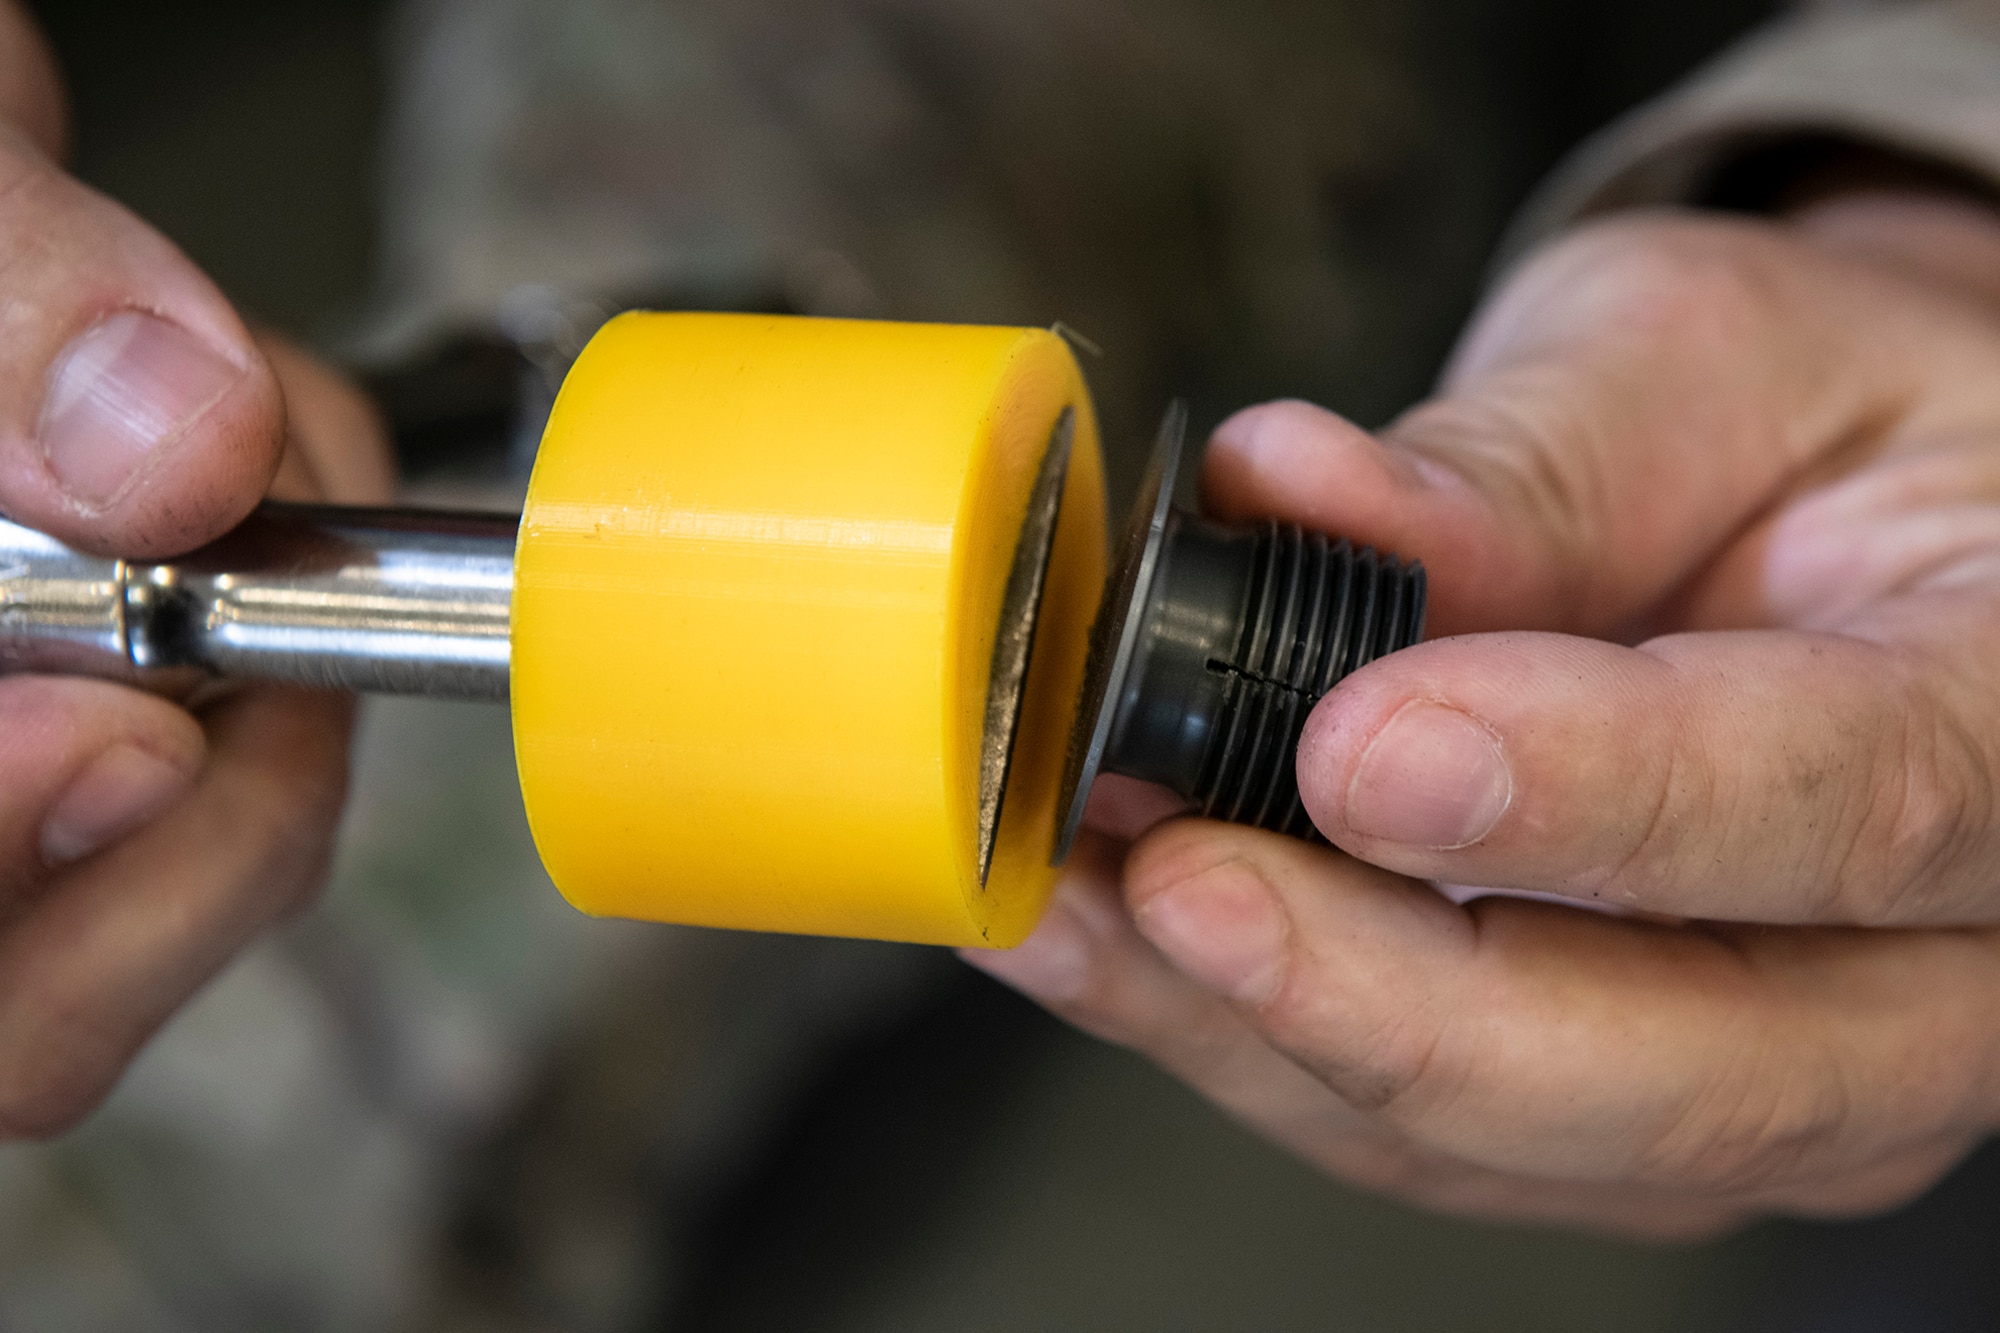 Tech. Sgt. Michael Resseguie, 919th Special Operations Maintenance Squadron metals technology craftsman, holds a 3D-printed jackpad plug removal tool at Duke Field, Florida, June 23, 2020.